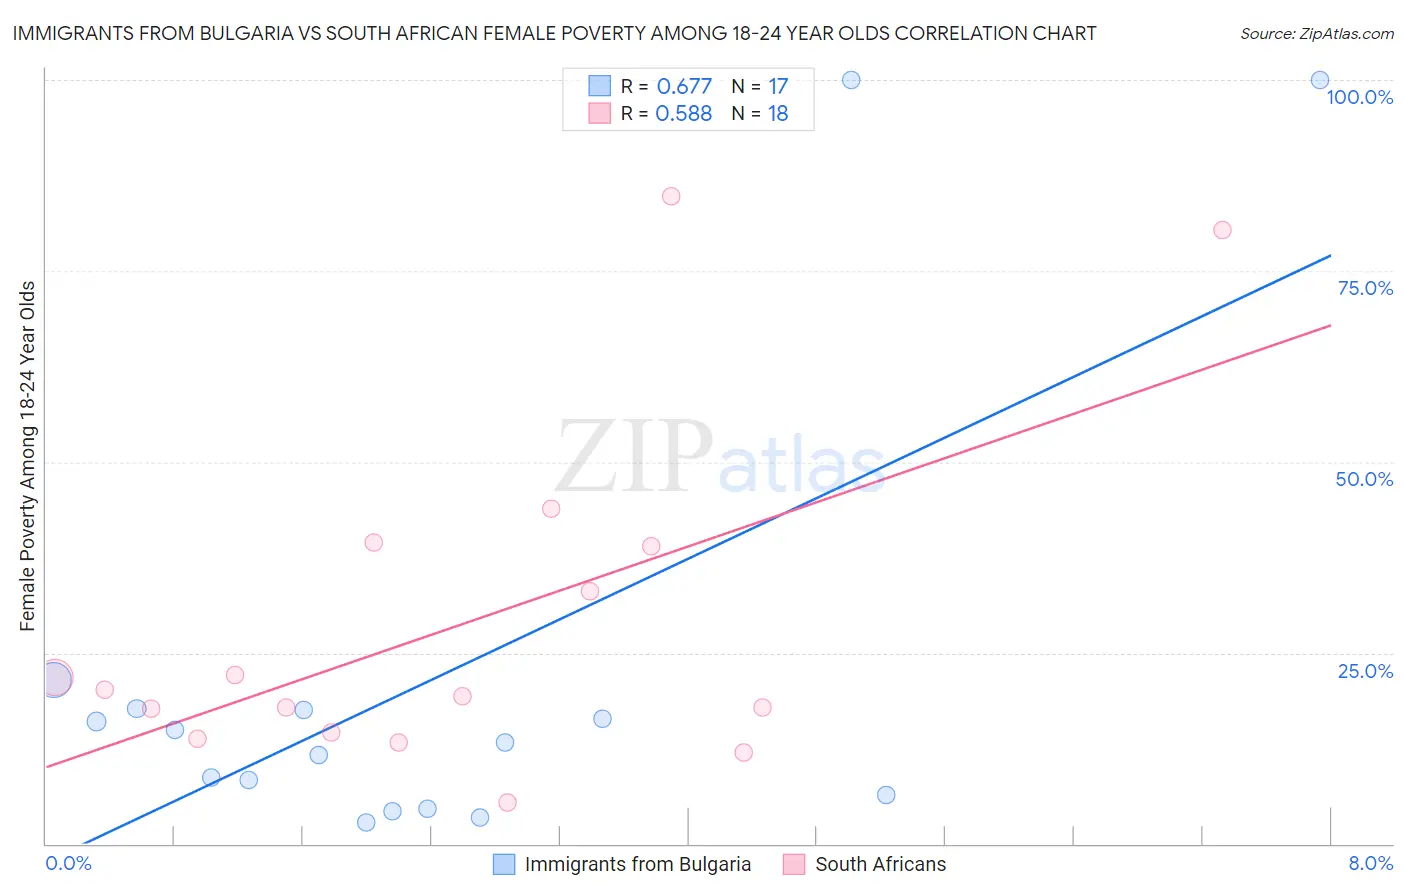 Immigrants from Bulgaria vs South African Female Poverty Among 18-24 Year Olds